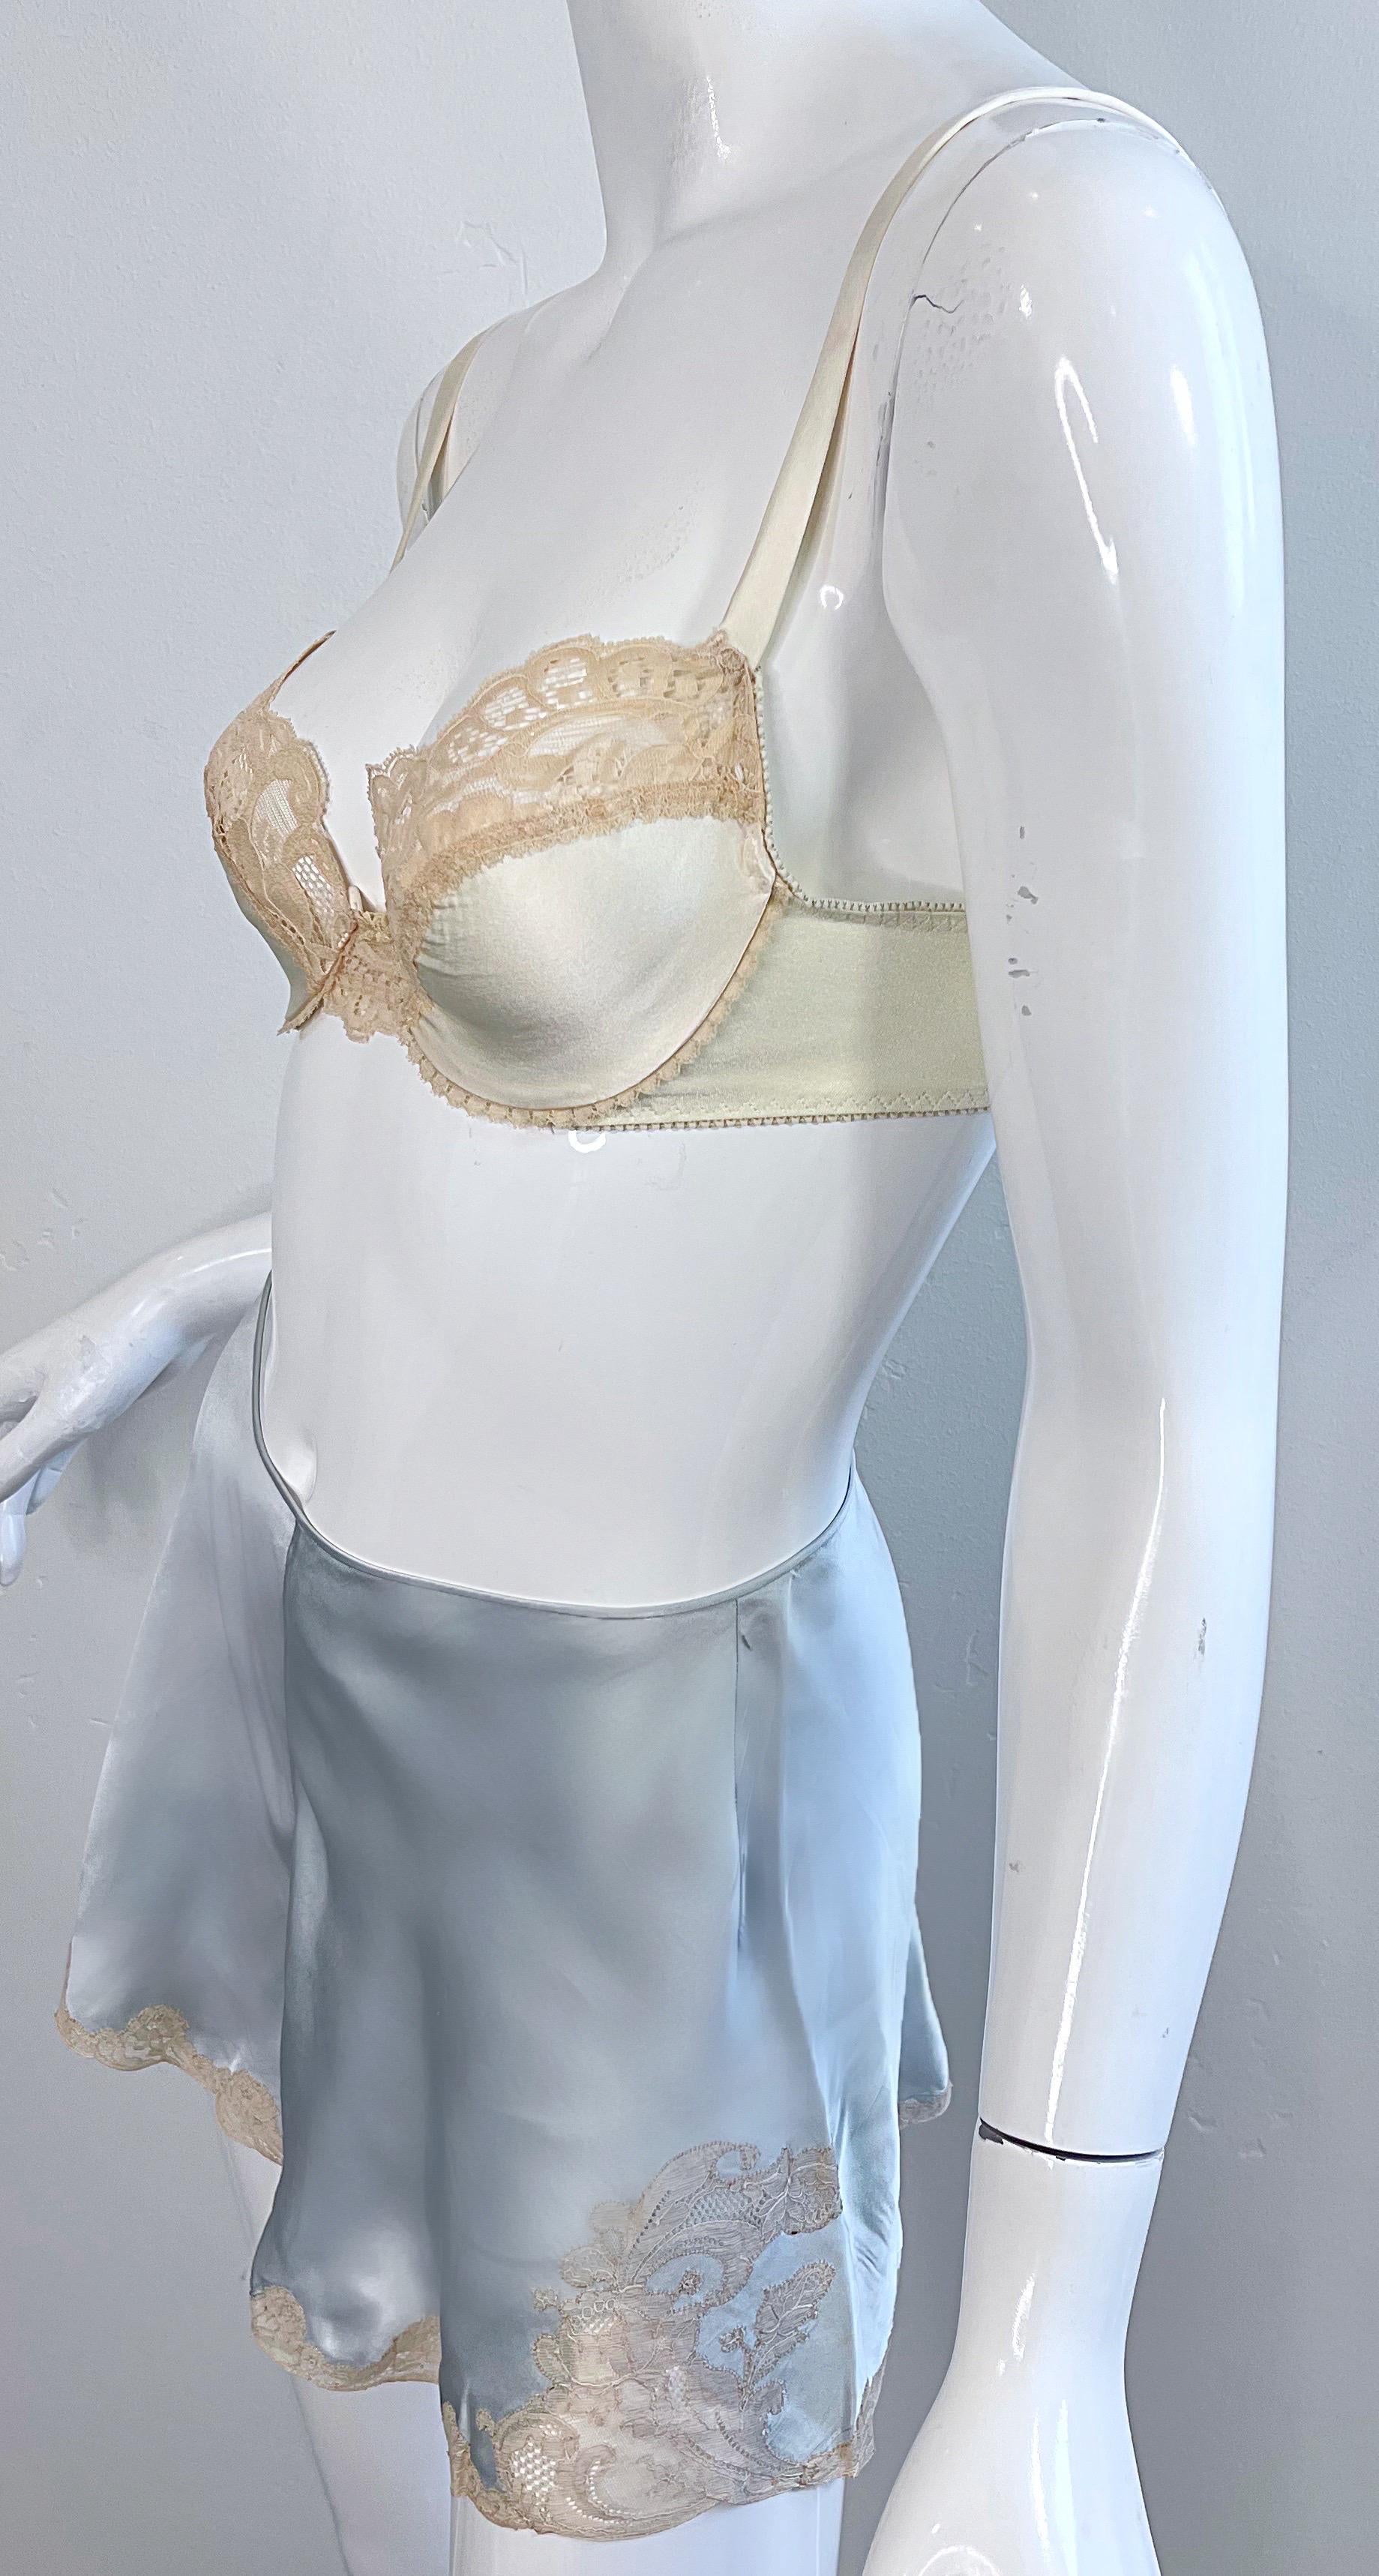 1960s Christian Dior 32A Silk Three Piece Bloomers Bra 60s Vintage Lingerie Set For Sale 9